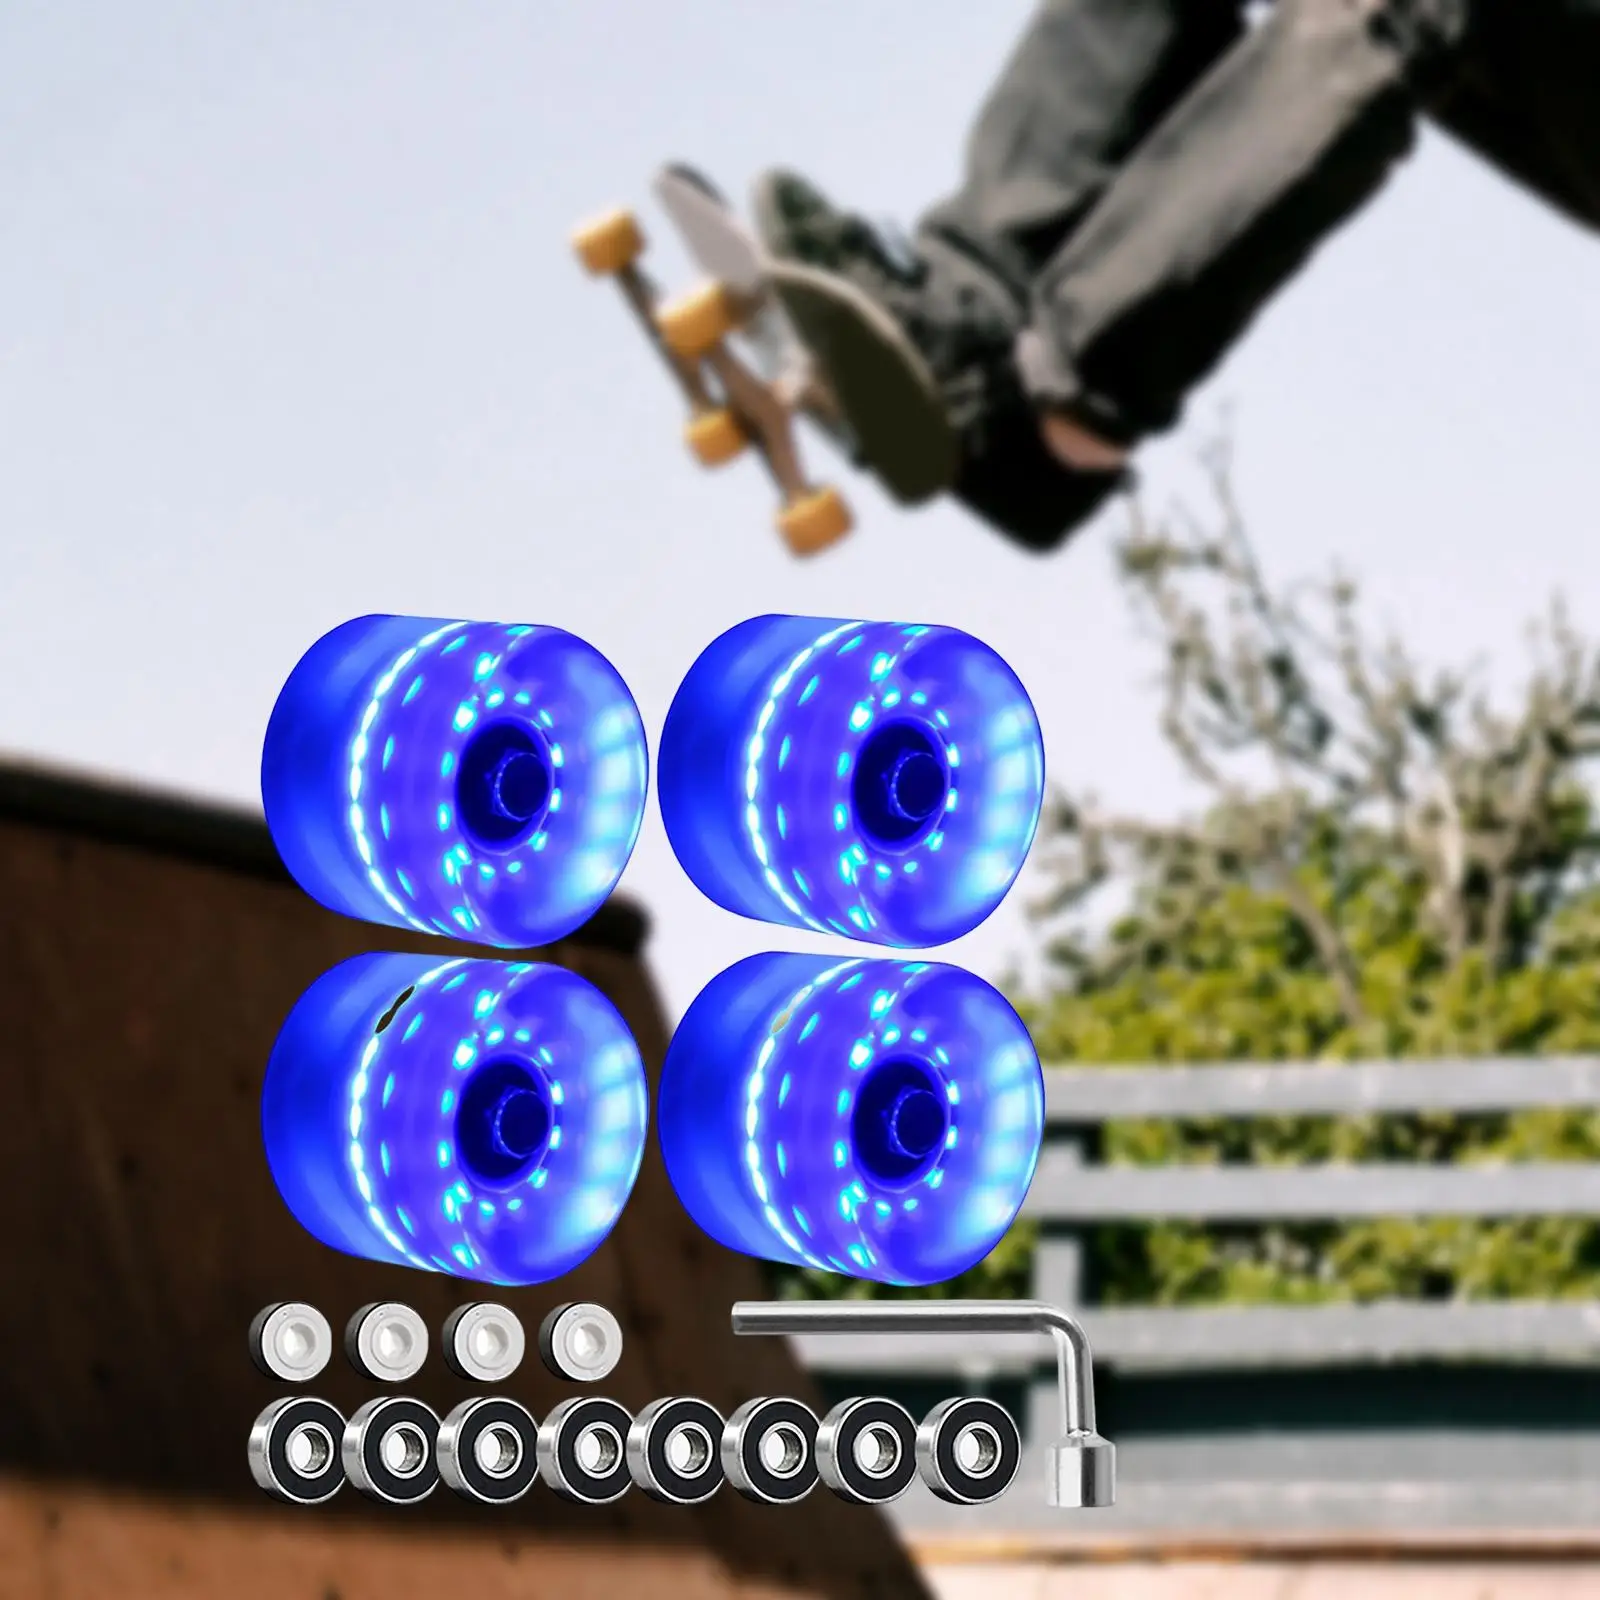 4Pcs Quad Roller Skate Wheels 45x60mm Easy to Install Replacment for Outdoor